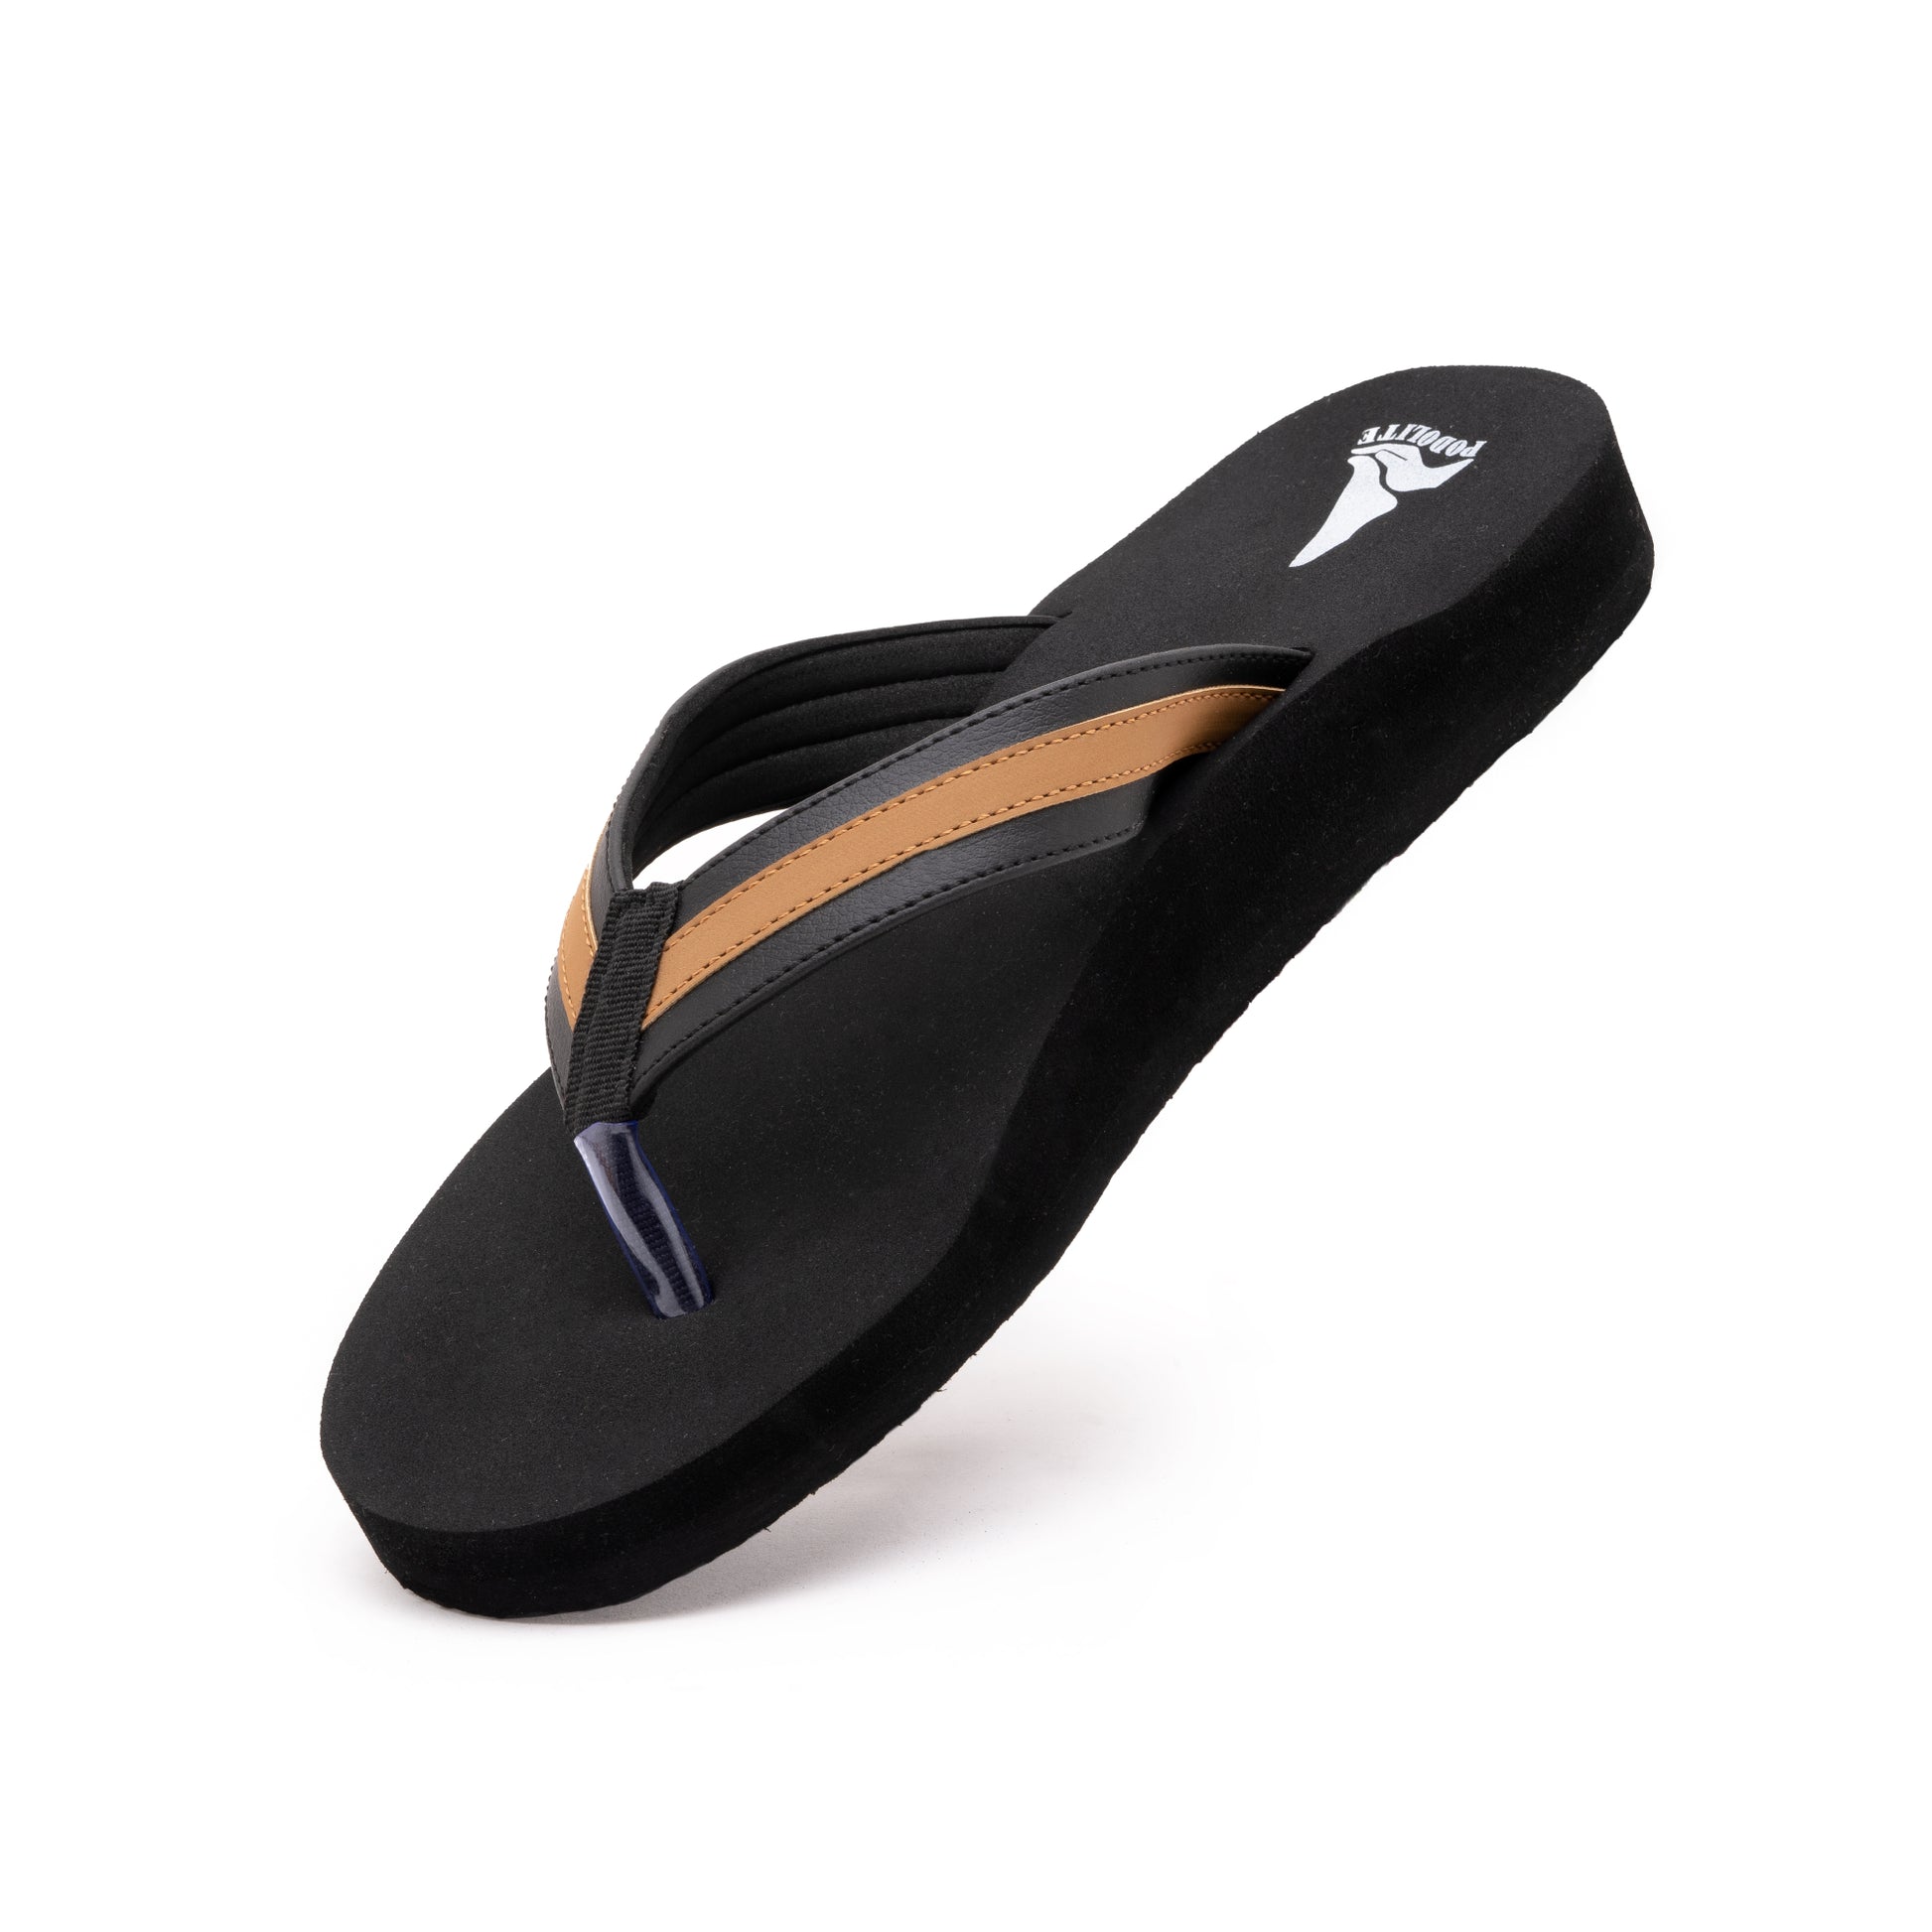 Punk Style Triple S Flip Flops For Men And Women HardCroc Beach And Pool  Slides With Rubber Sliders Rivet Slide And Casual Style From  Airjordansneaker, $82.26 | DHgate.Com